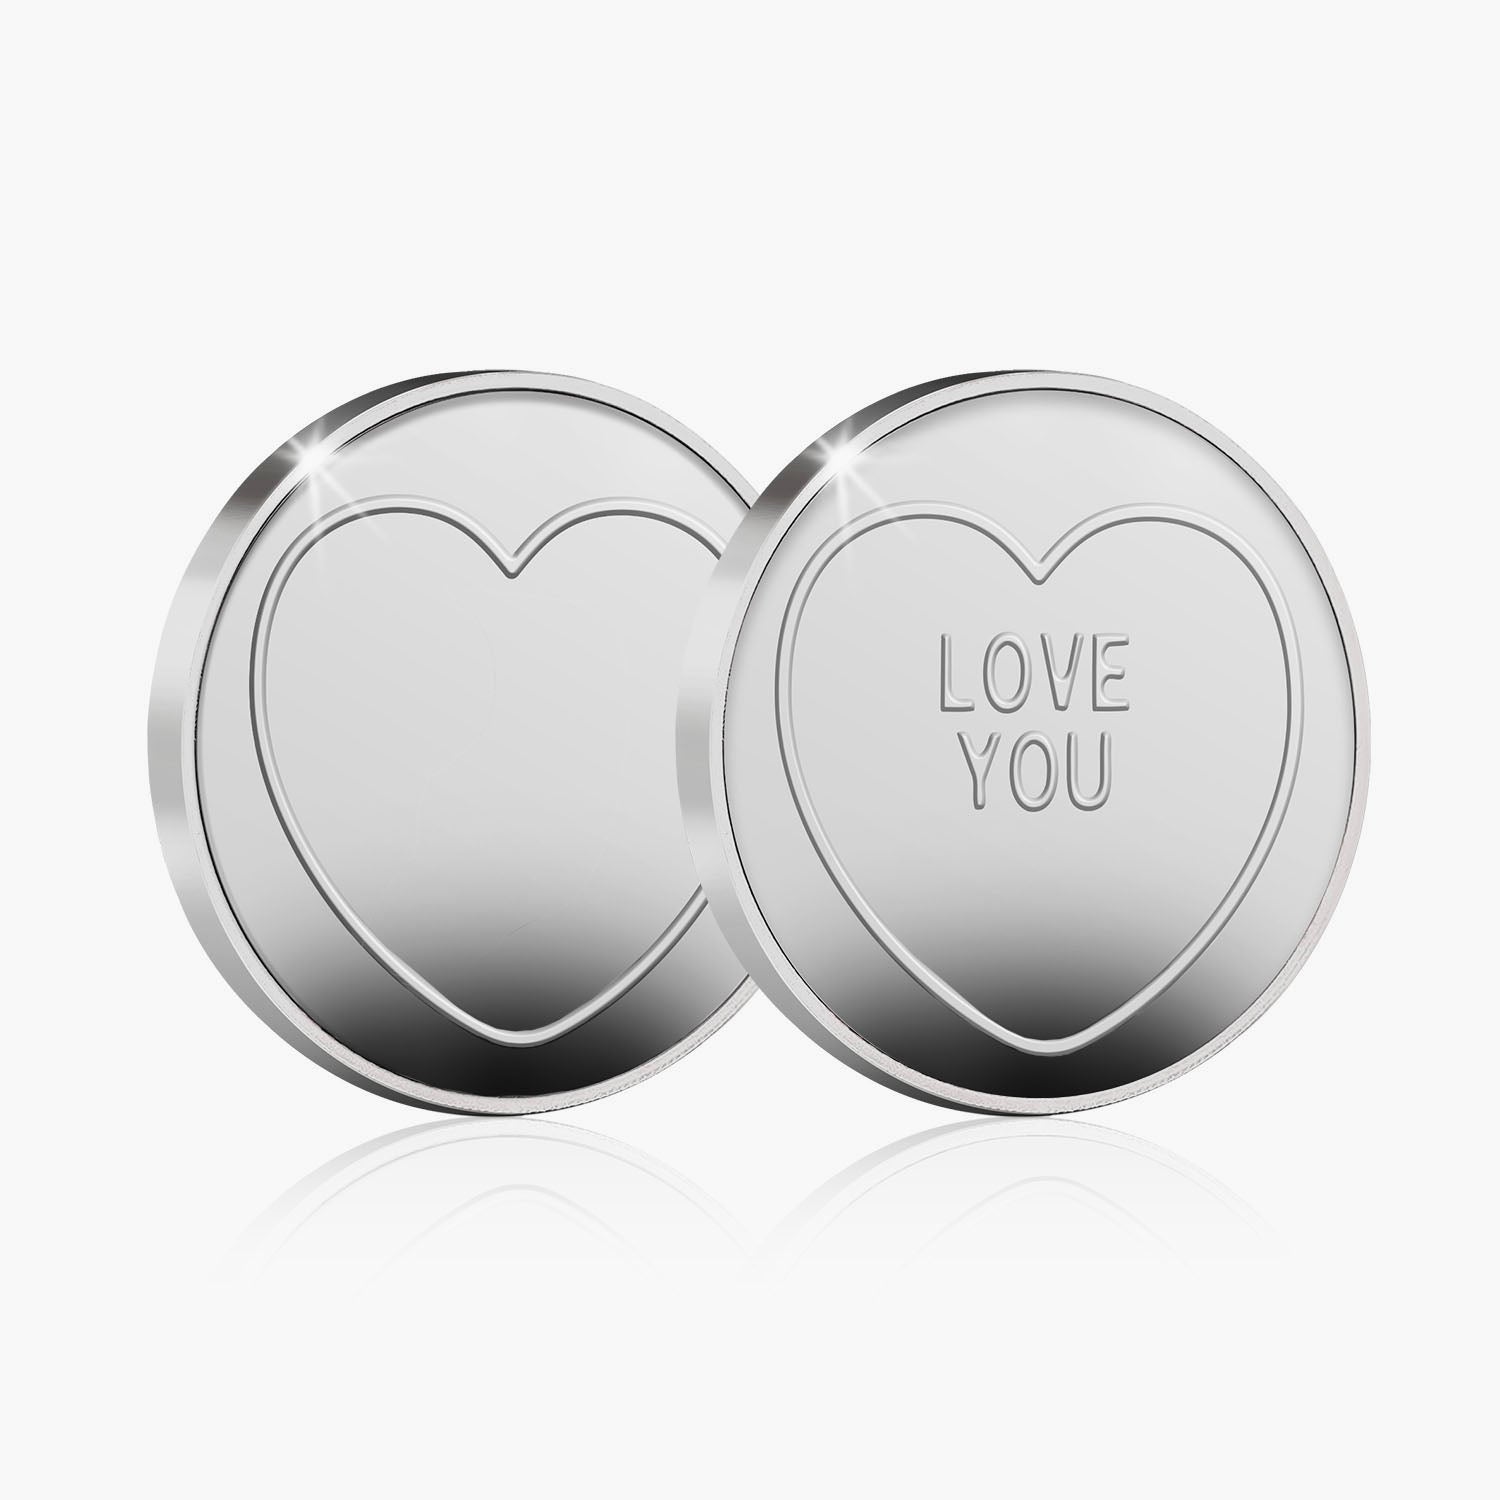 Love You Solid Silver Love Heart